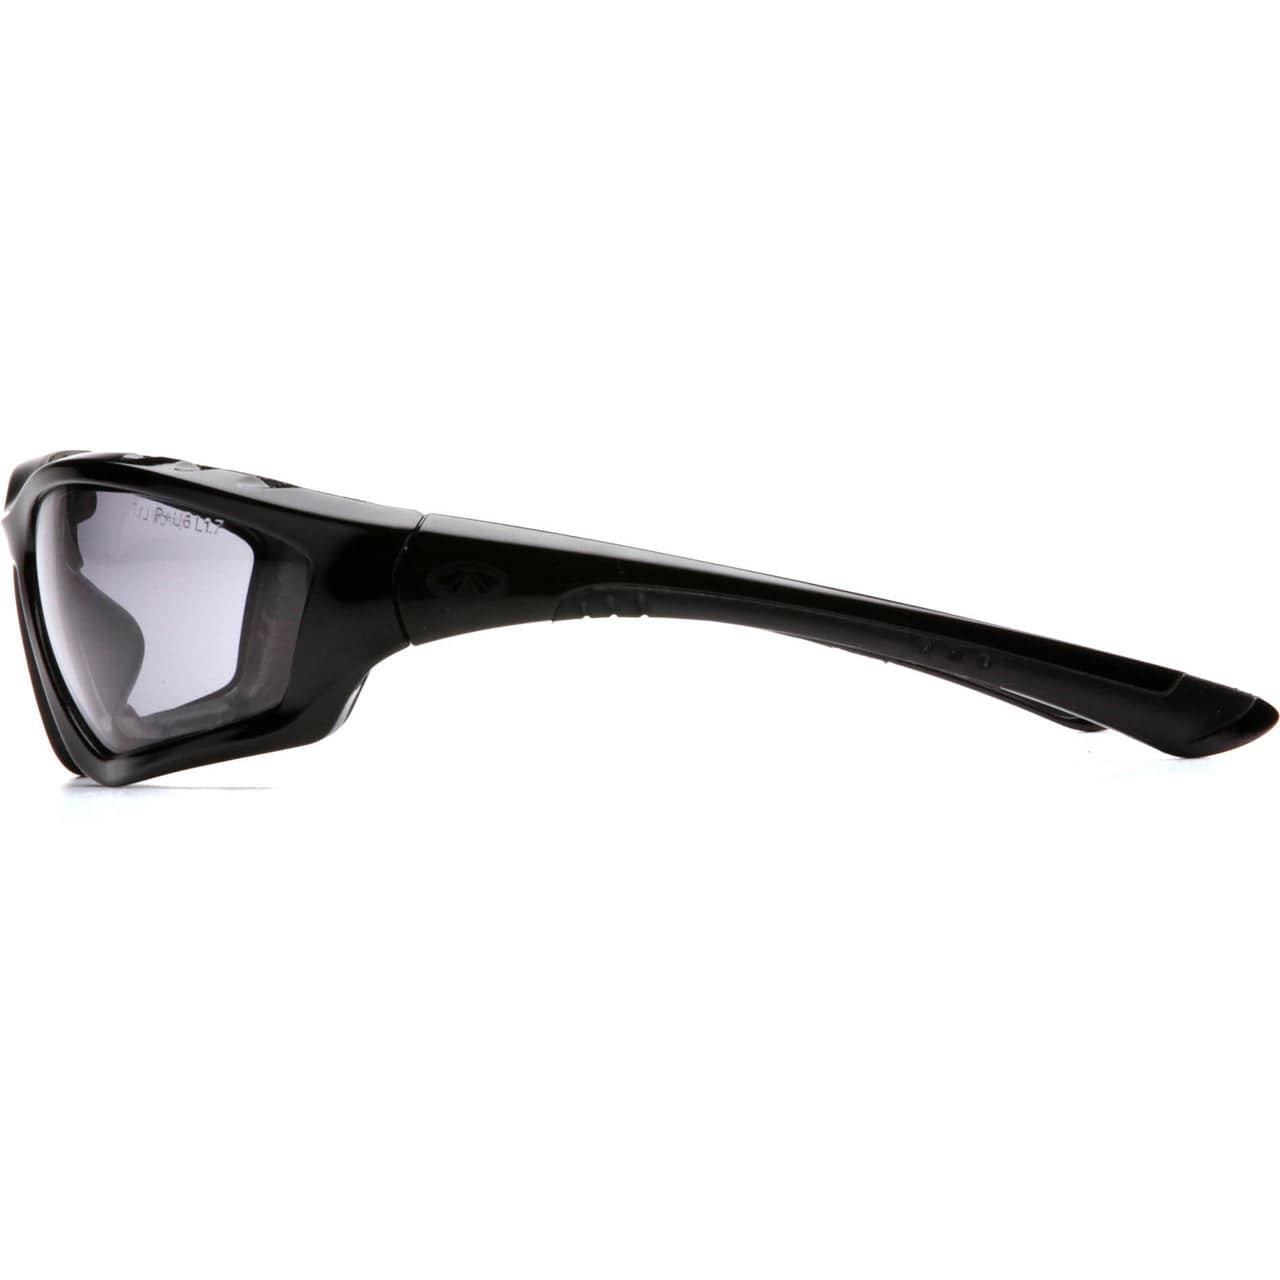 Pyramex Accurist Safety Glasses with Black Frame and Light Gray Anti-Fog Lens SB8725DTP Side View